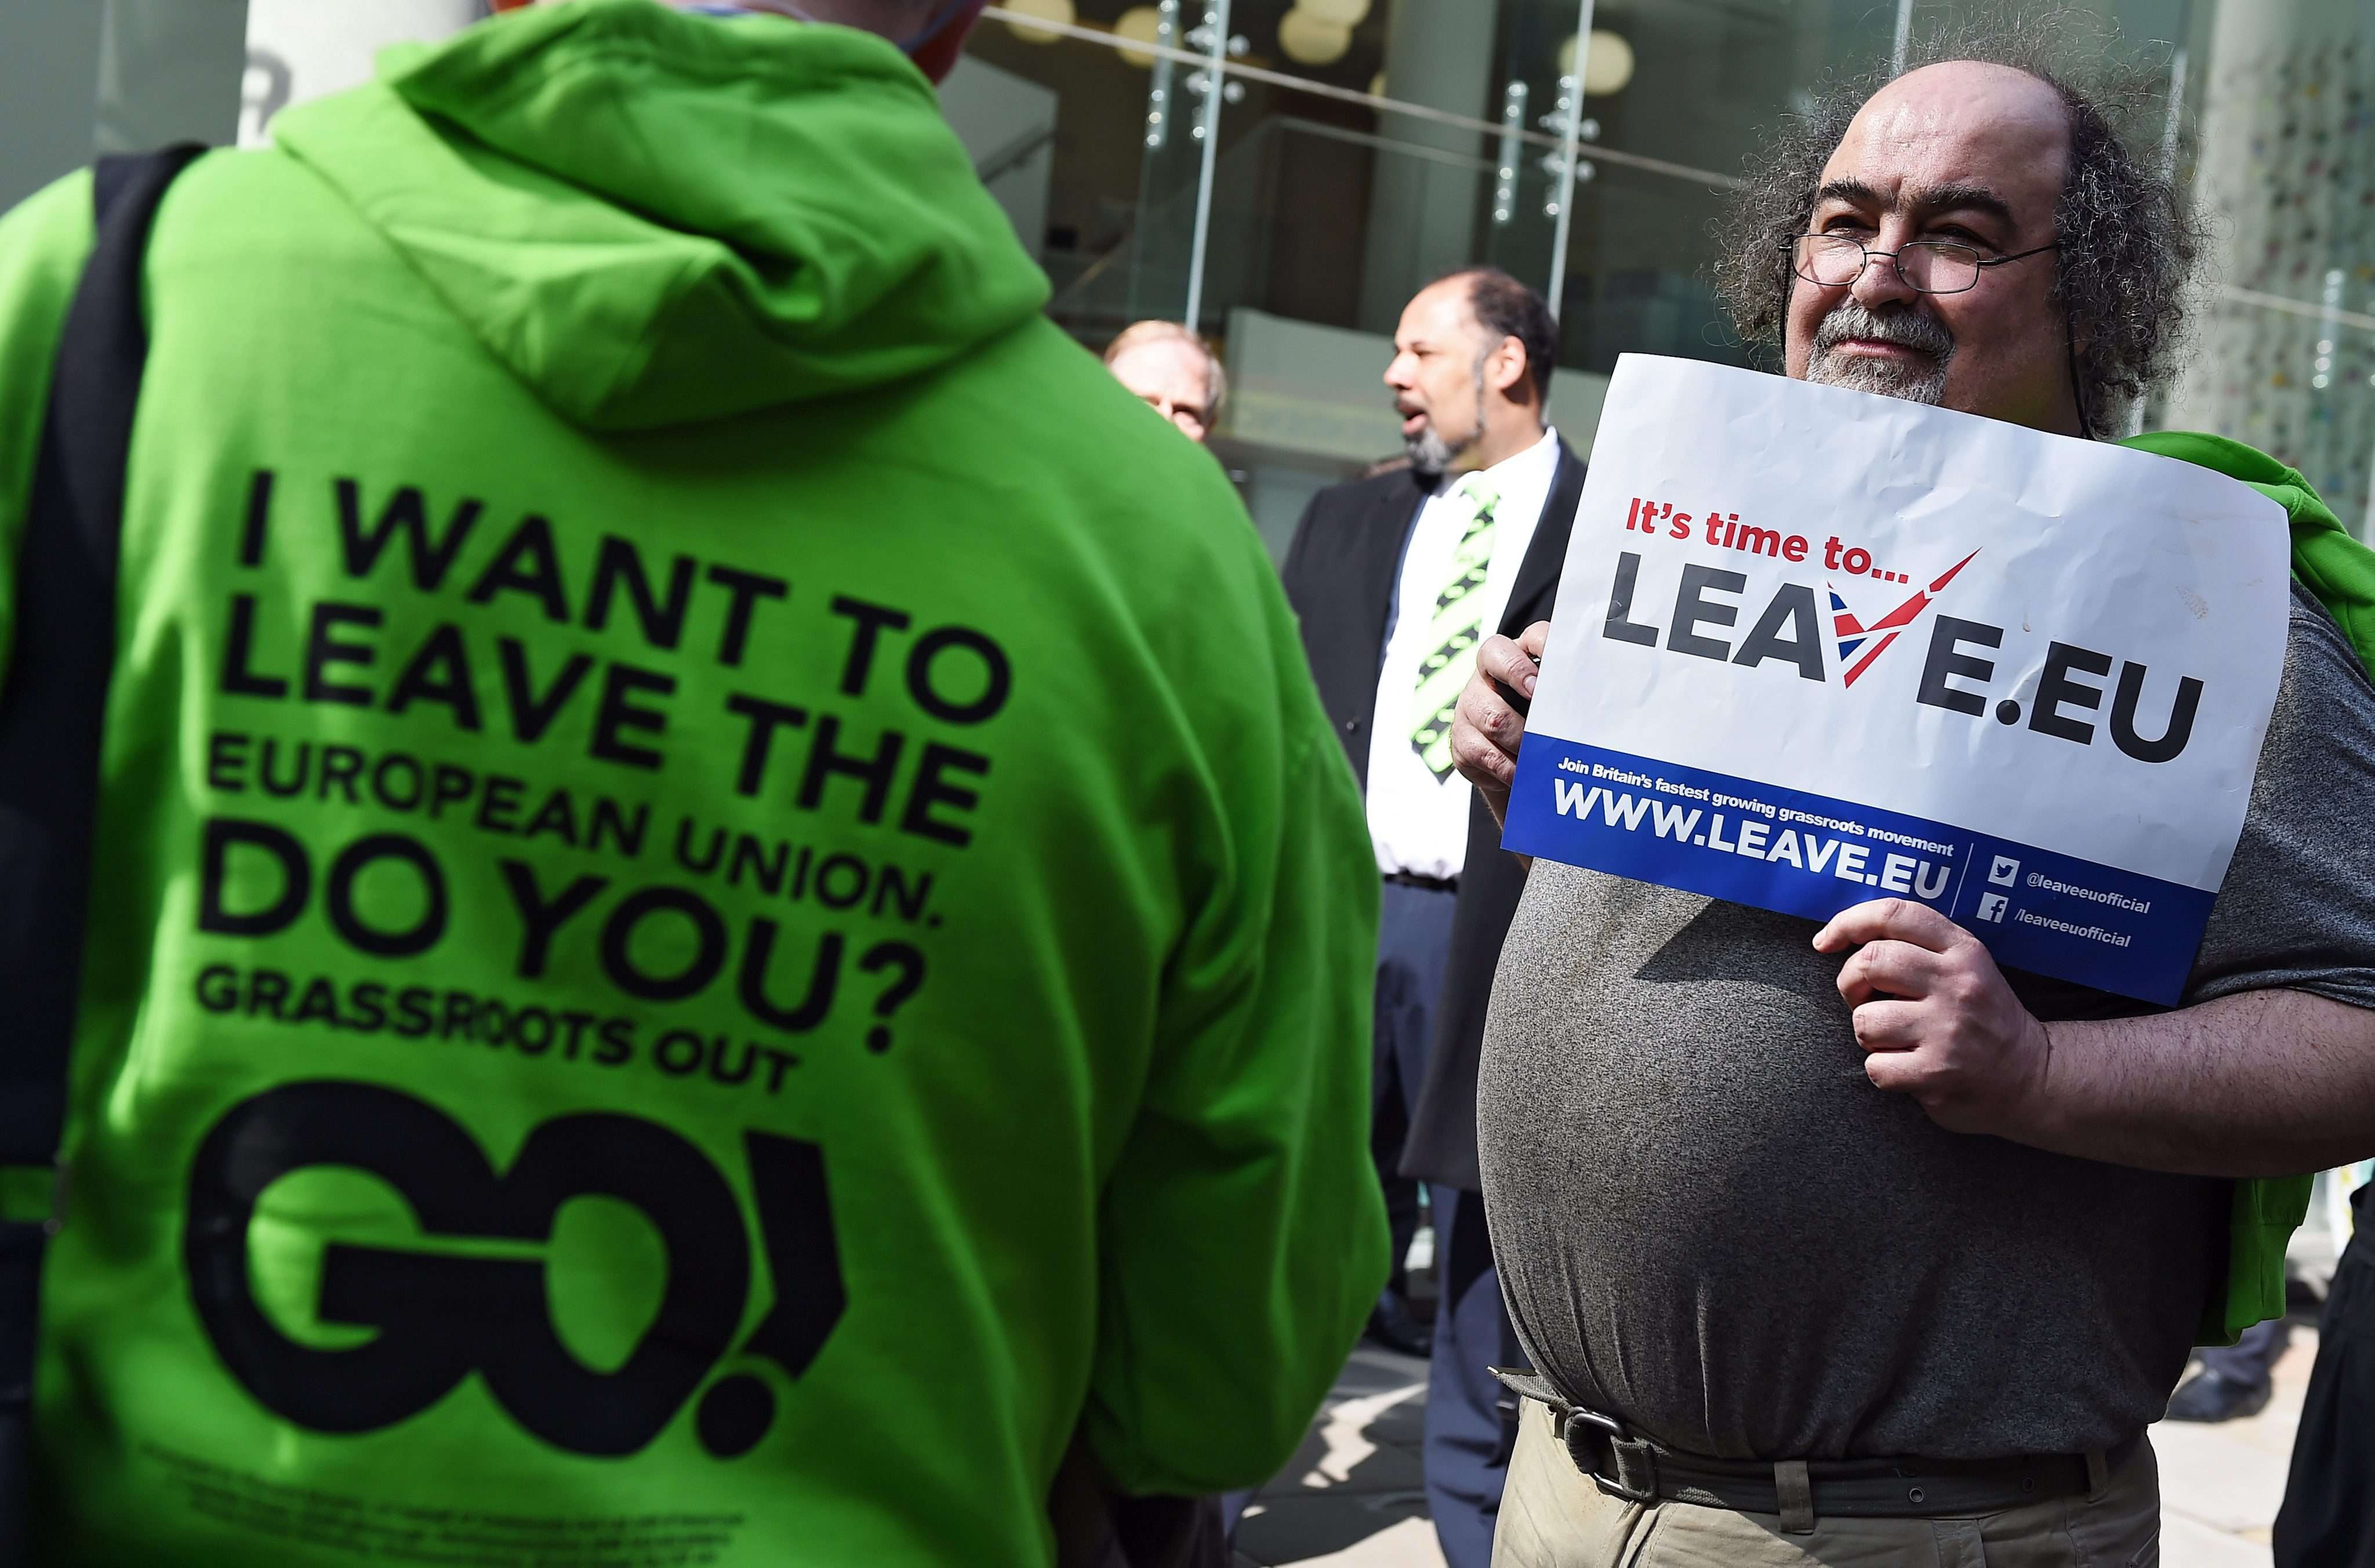 Supporters of a Grassroots Out campaign advocating Britain’s exit from the European Union. Photo: EPA